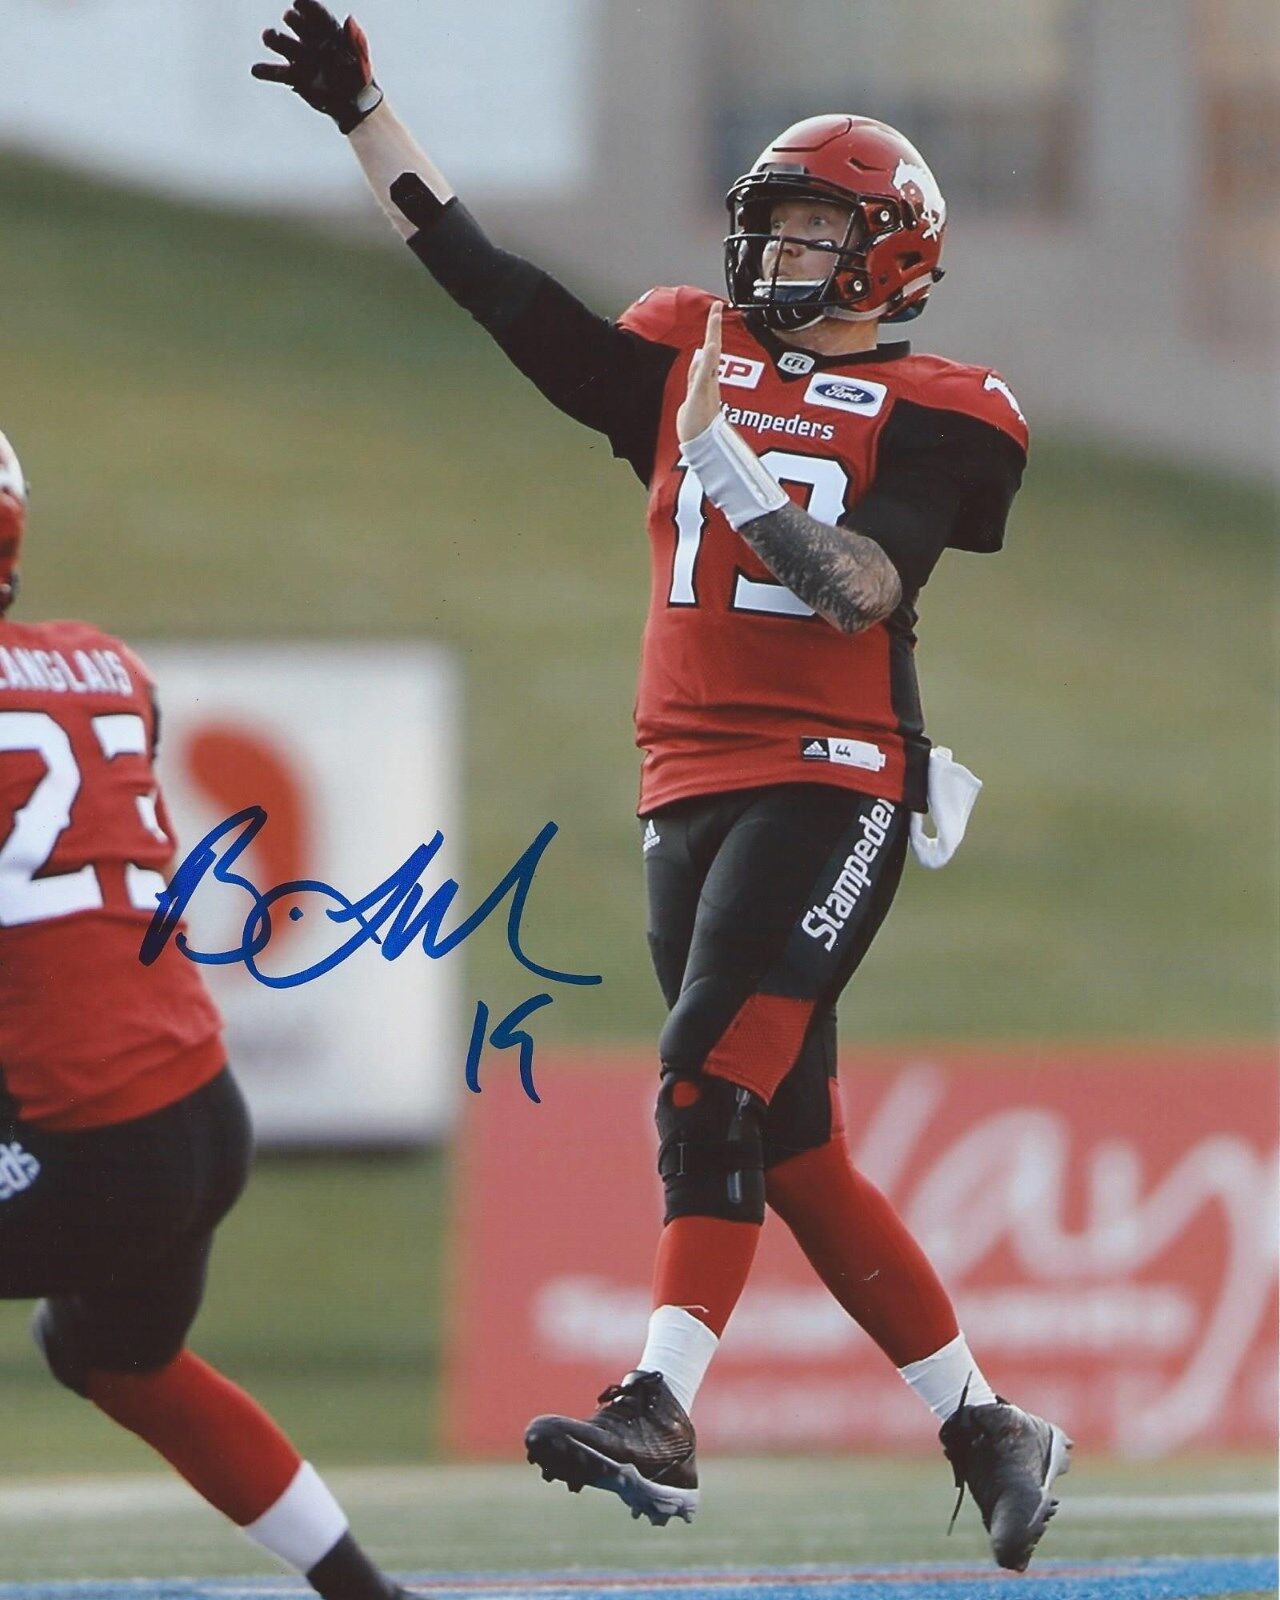 Bo Levi Mitchell Signed 8x10 Photo Poster painting Calgary Stampeders Autographed COA F